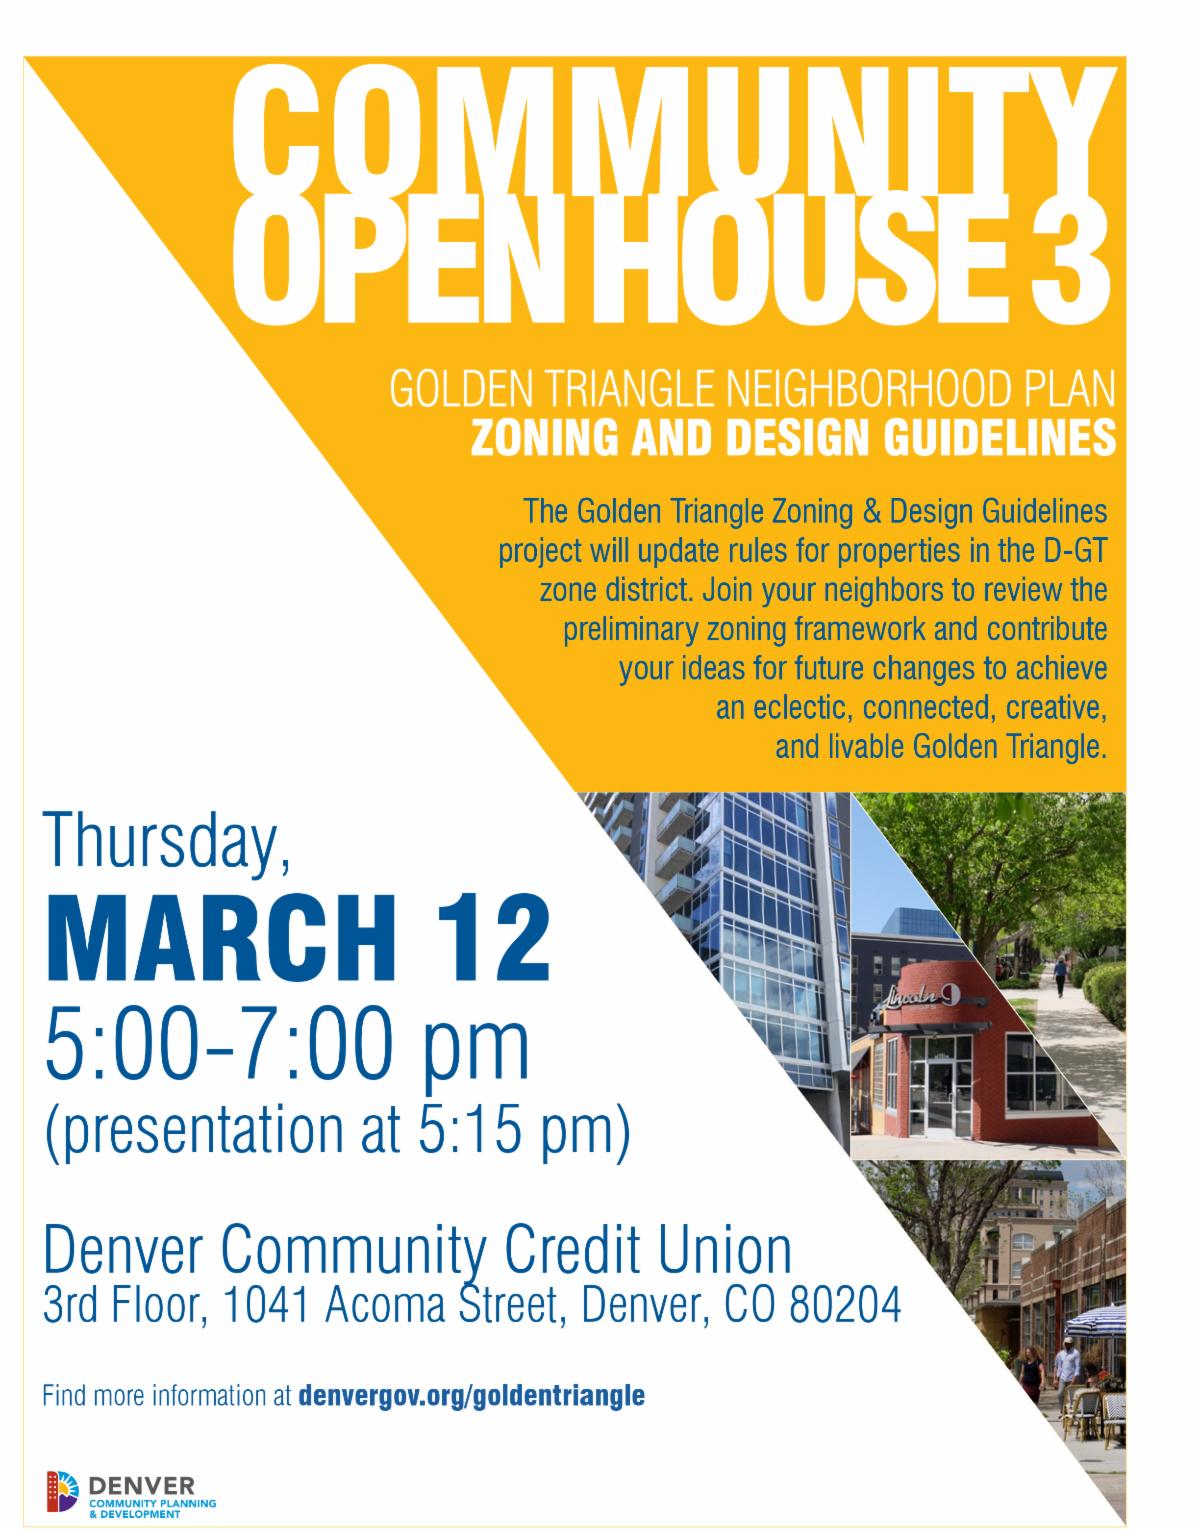 Join us at the Golden Triangle's third community open house